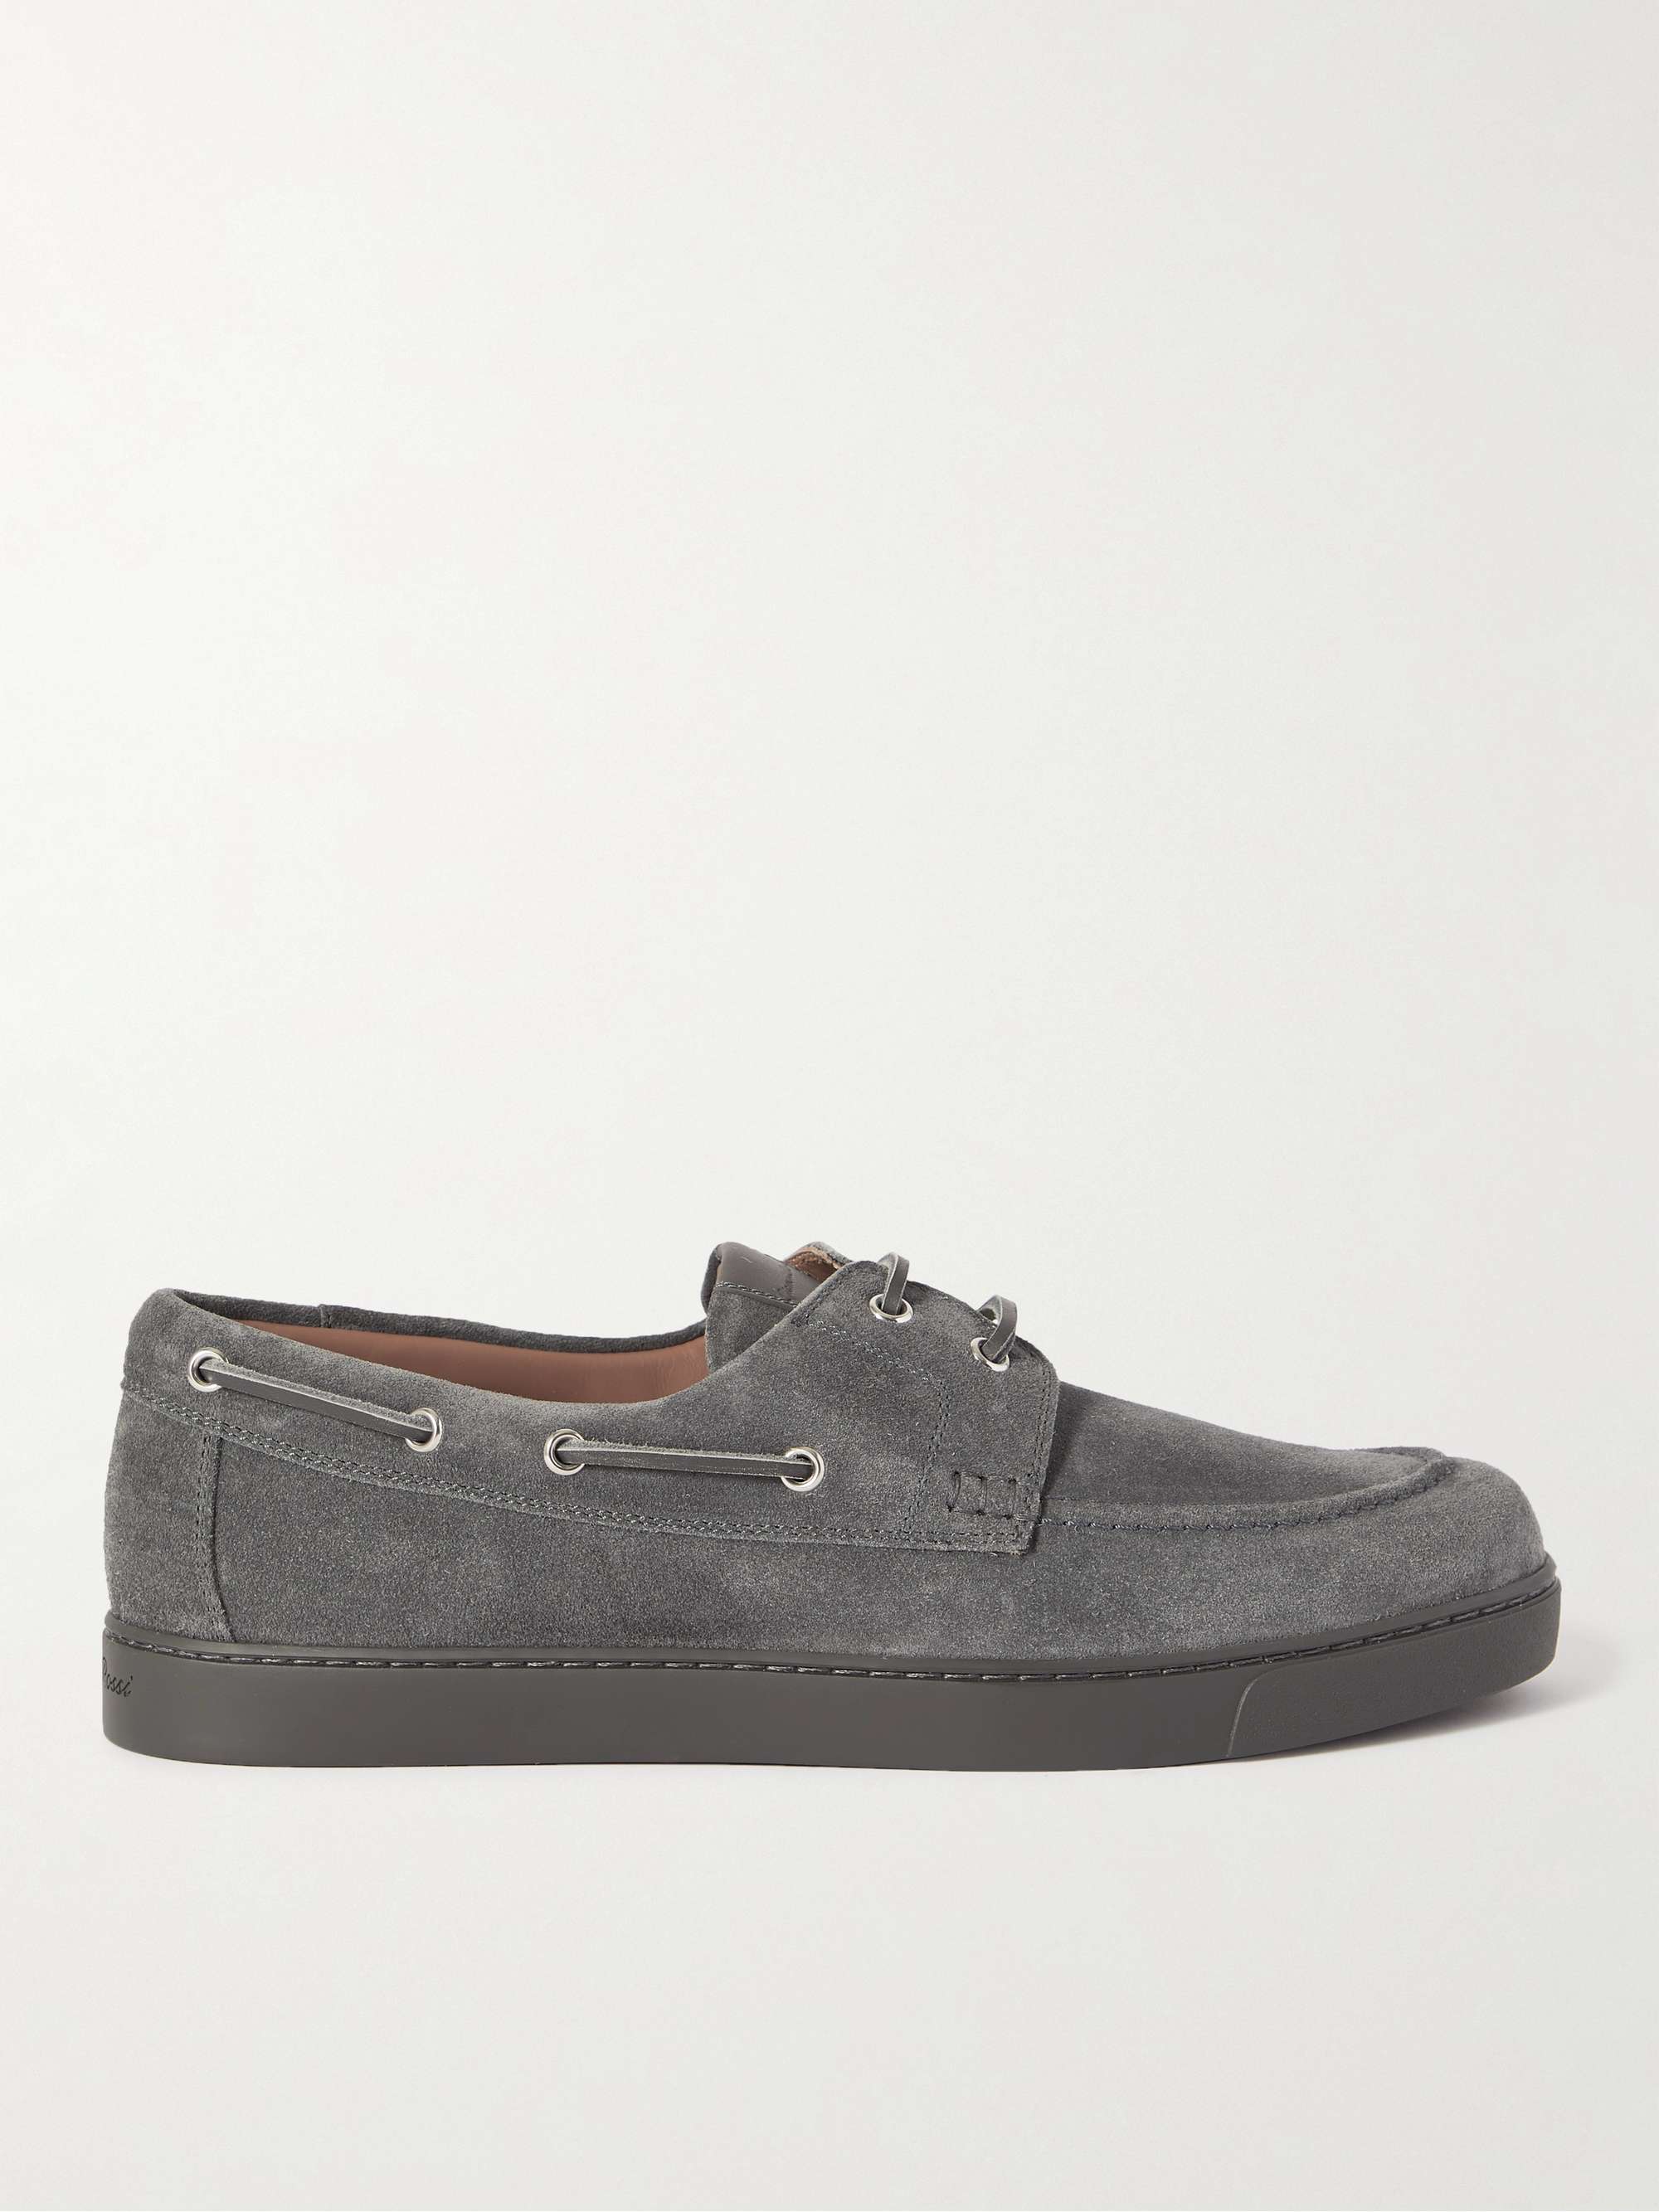 GIANVITO ROSSI Leather-Trimmed Suede Boat Shoes